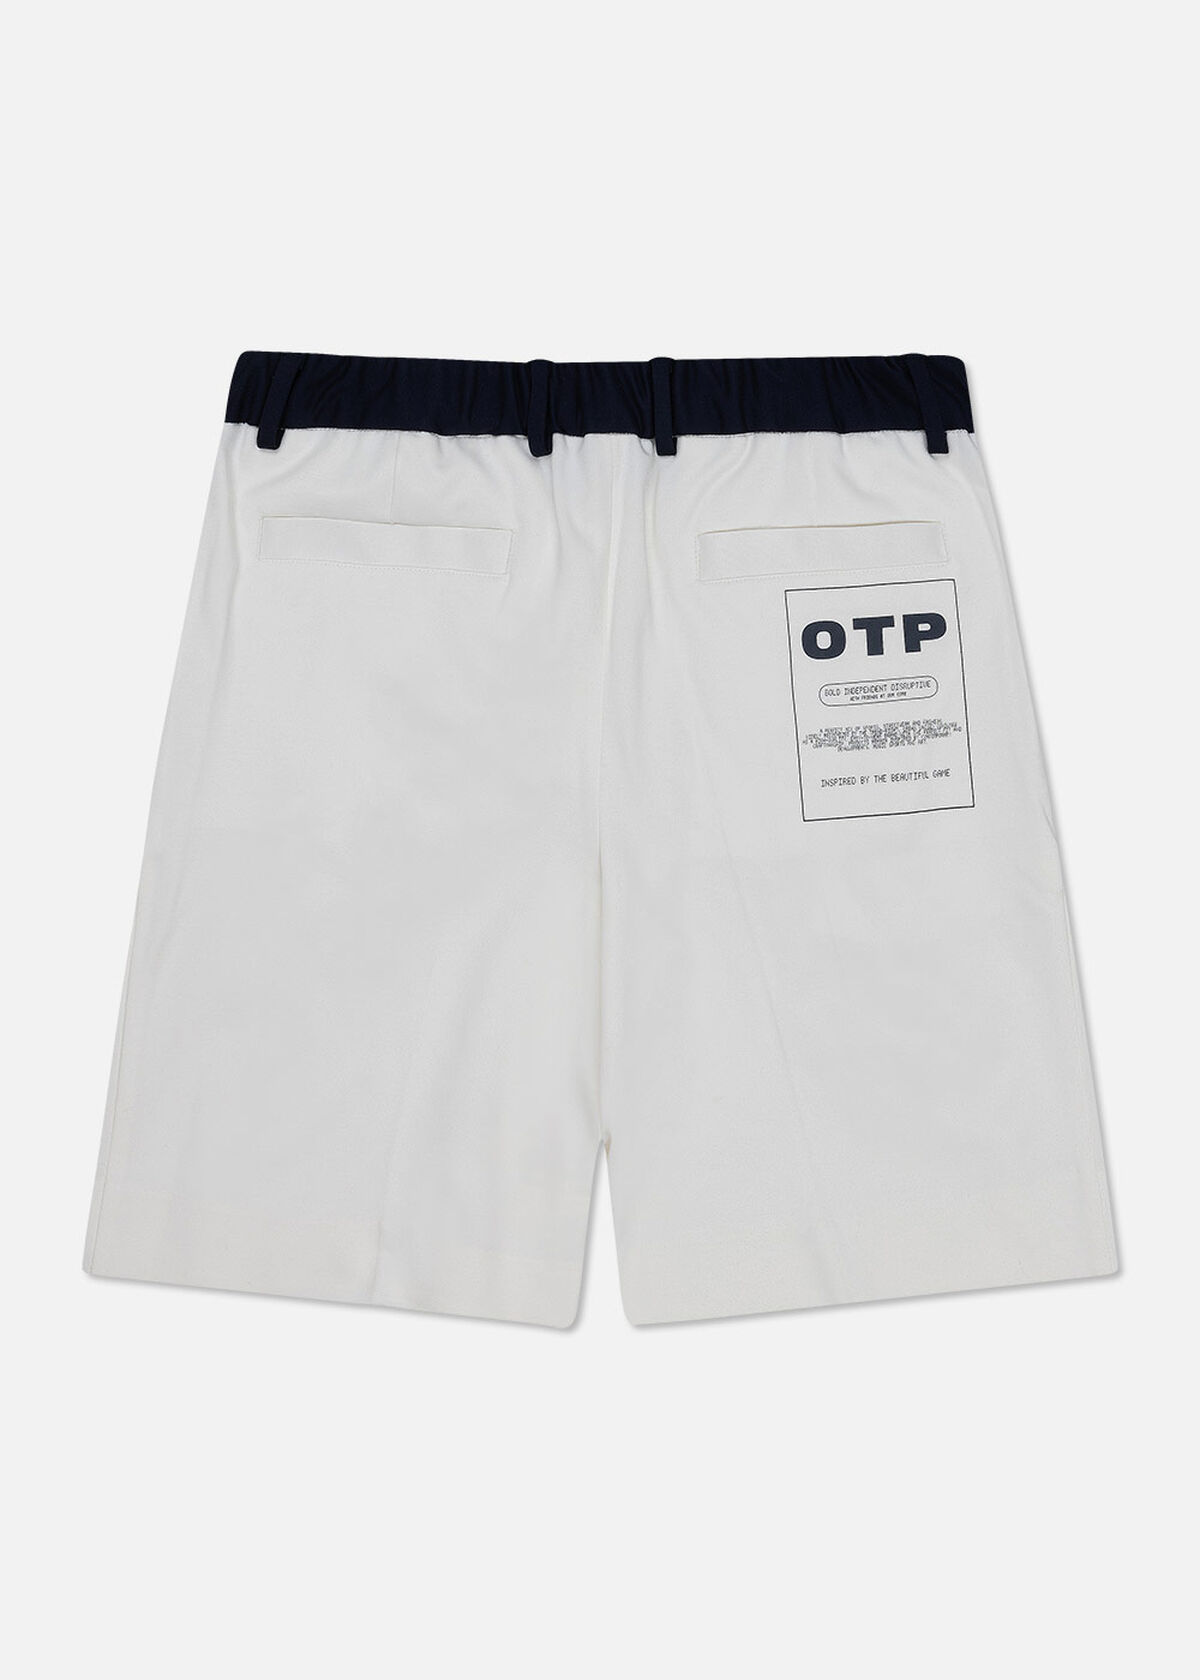 Rooftop Shorts - 67% Rayon/28,5% Nylon/4,5% Spande, Off white, hi-res